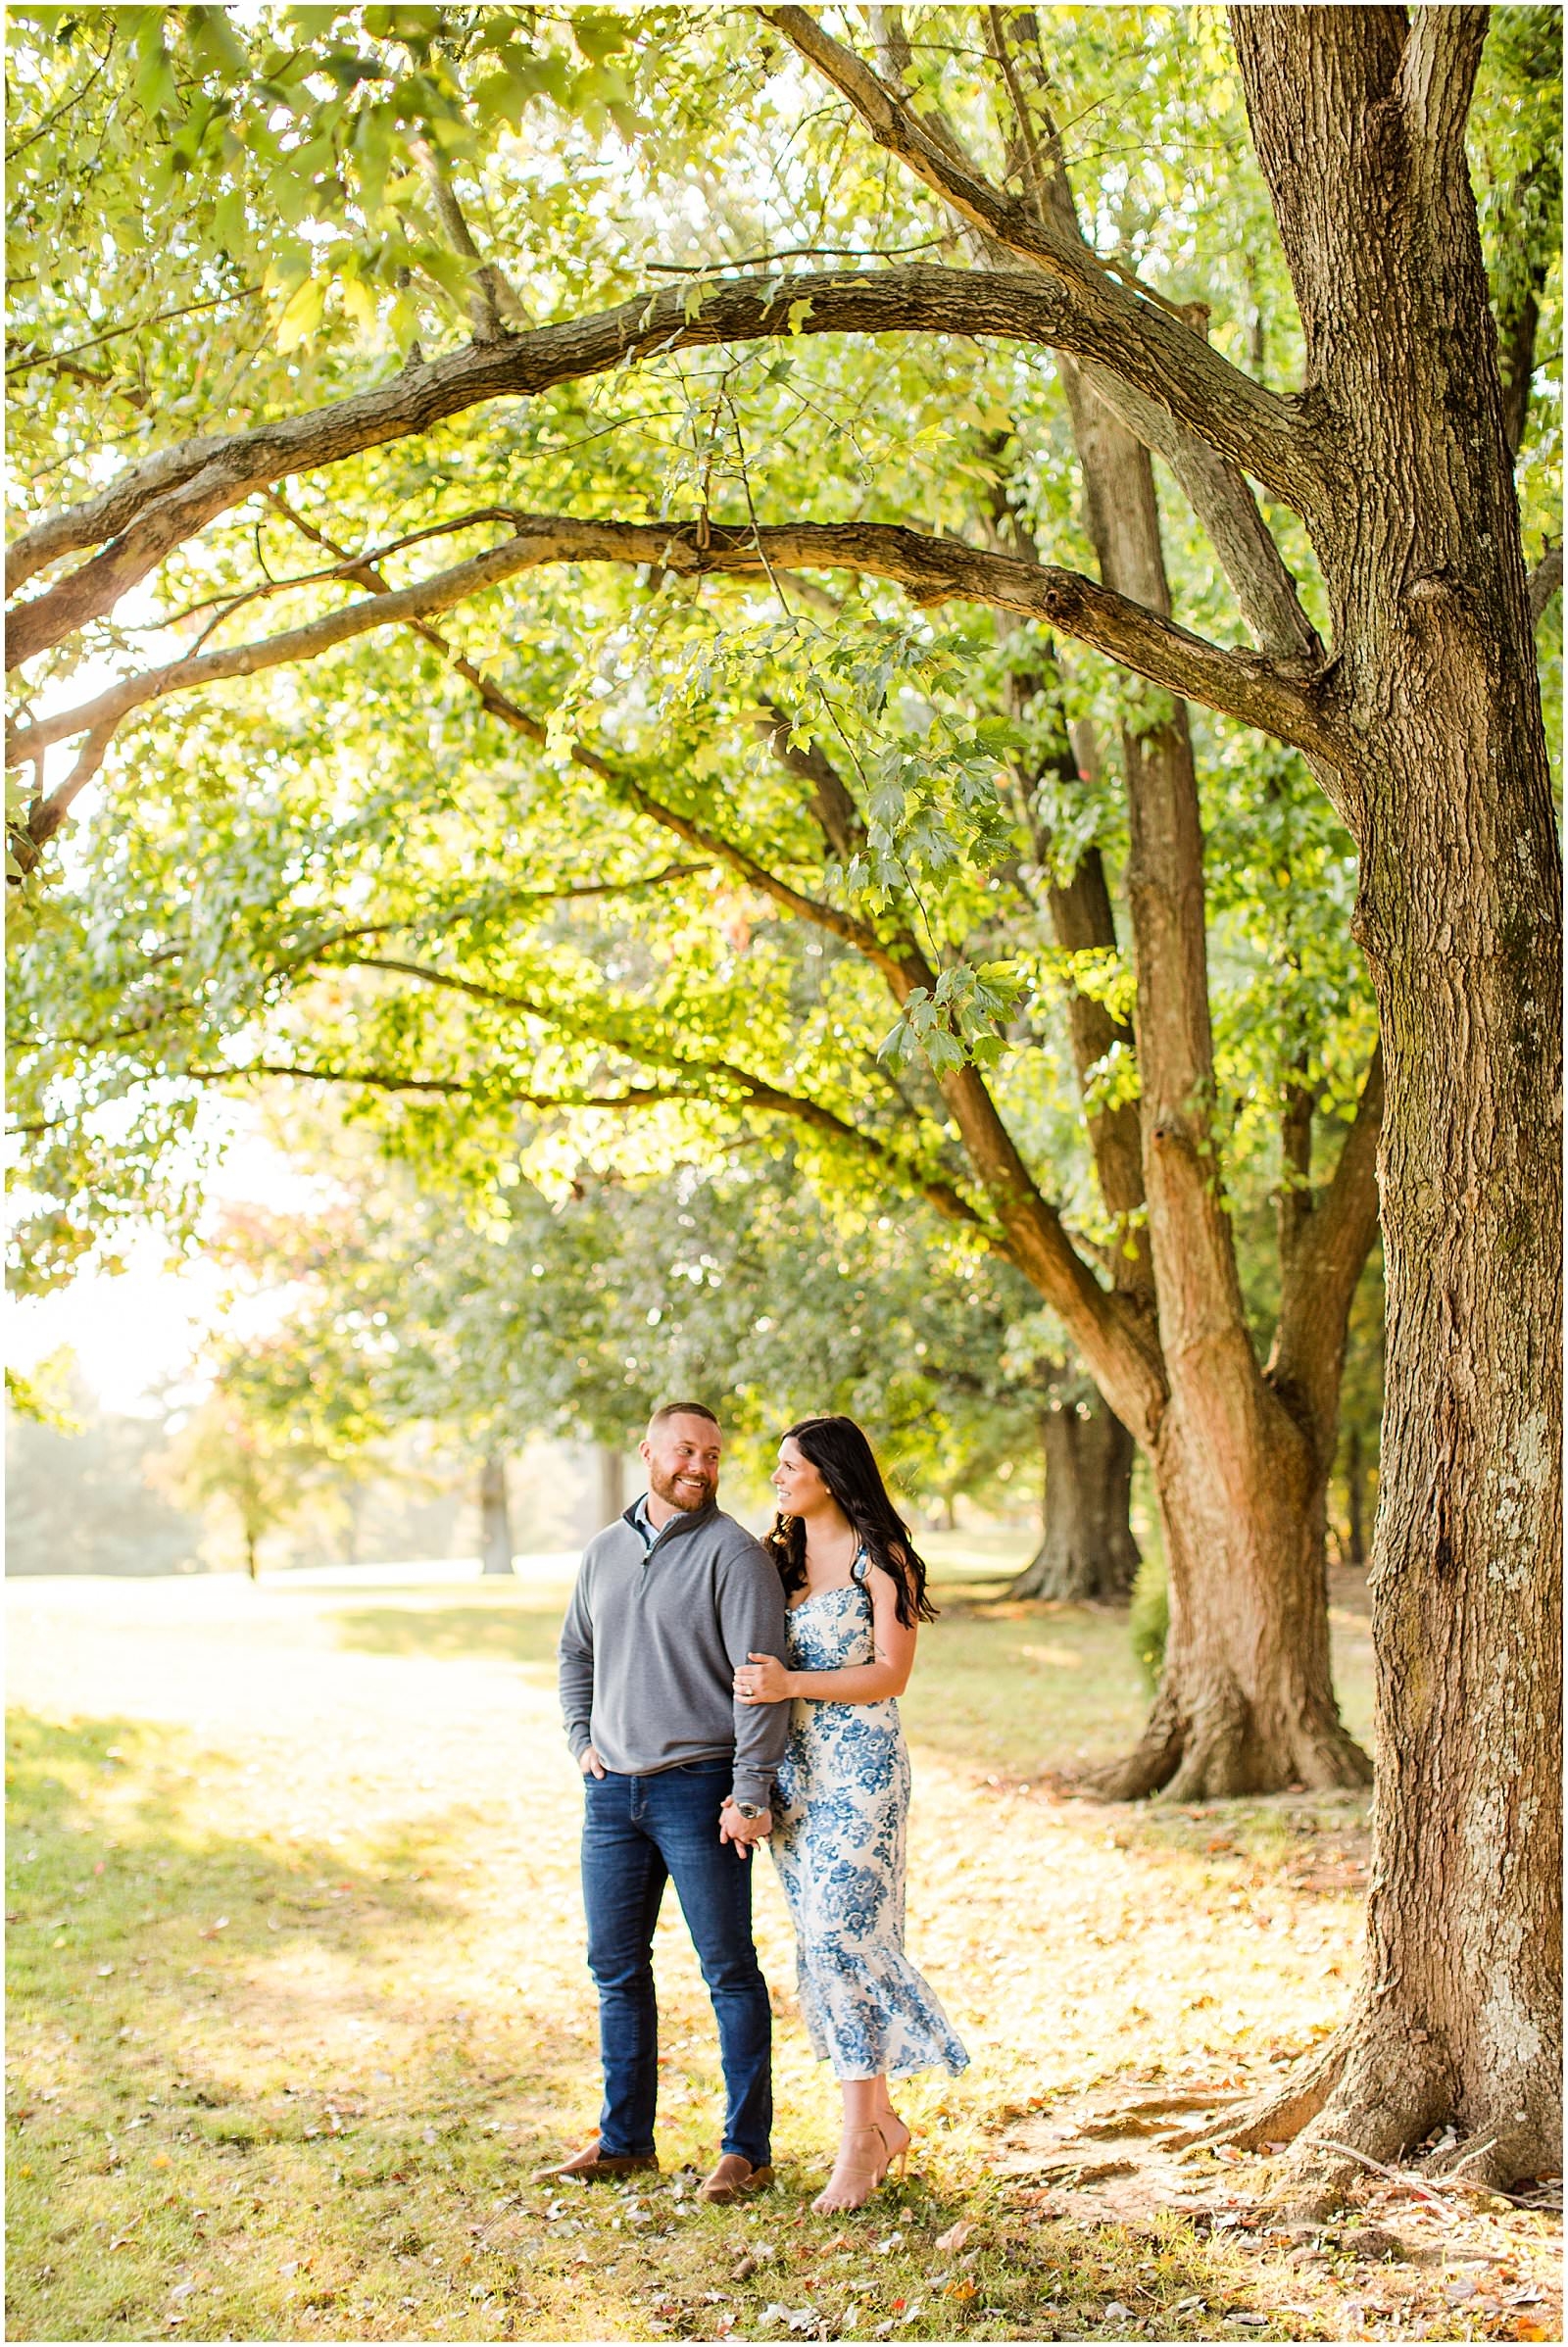 A Rolling Hills Country Club Engagement Session | Meagan and Kyle | Bret and Brandie Photography 0030.jpg